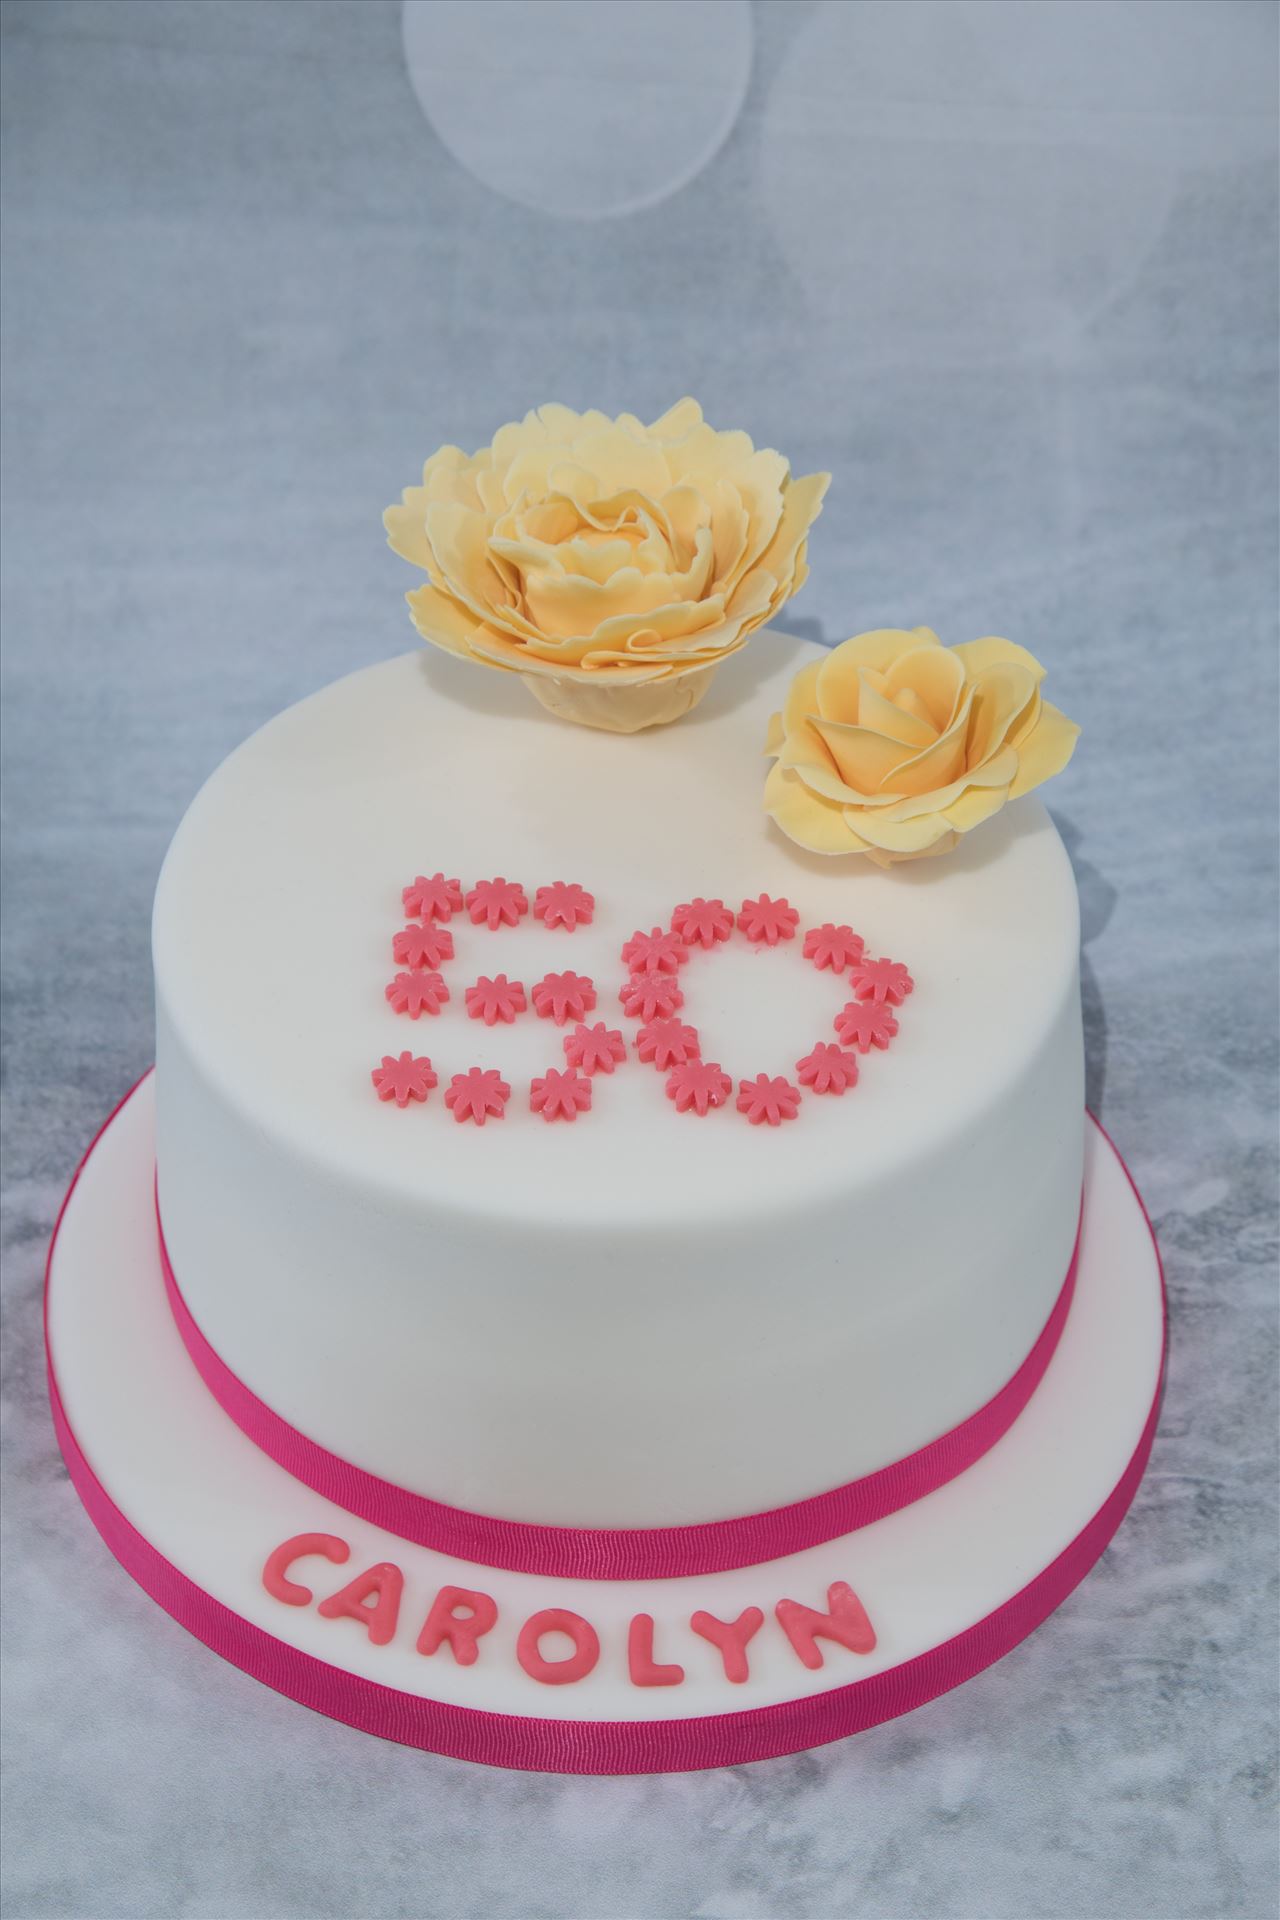 . I made this cake for a family members' 50th birthday recently. 3 layers of light and moist vanilla sponge sandwiched together with lashings of raspberry jam and creamy raspberry ripple buttercream. The flowers are hand crafted using flower paste. by Alison Wonderland Bakes